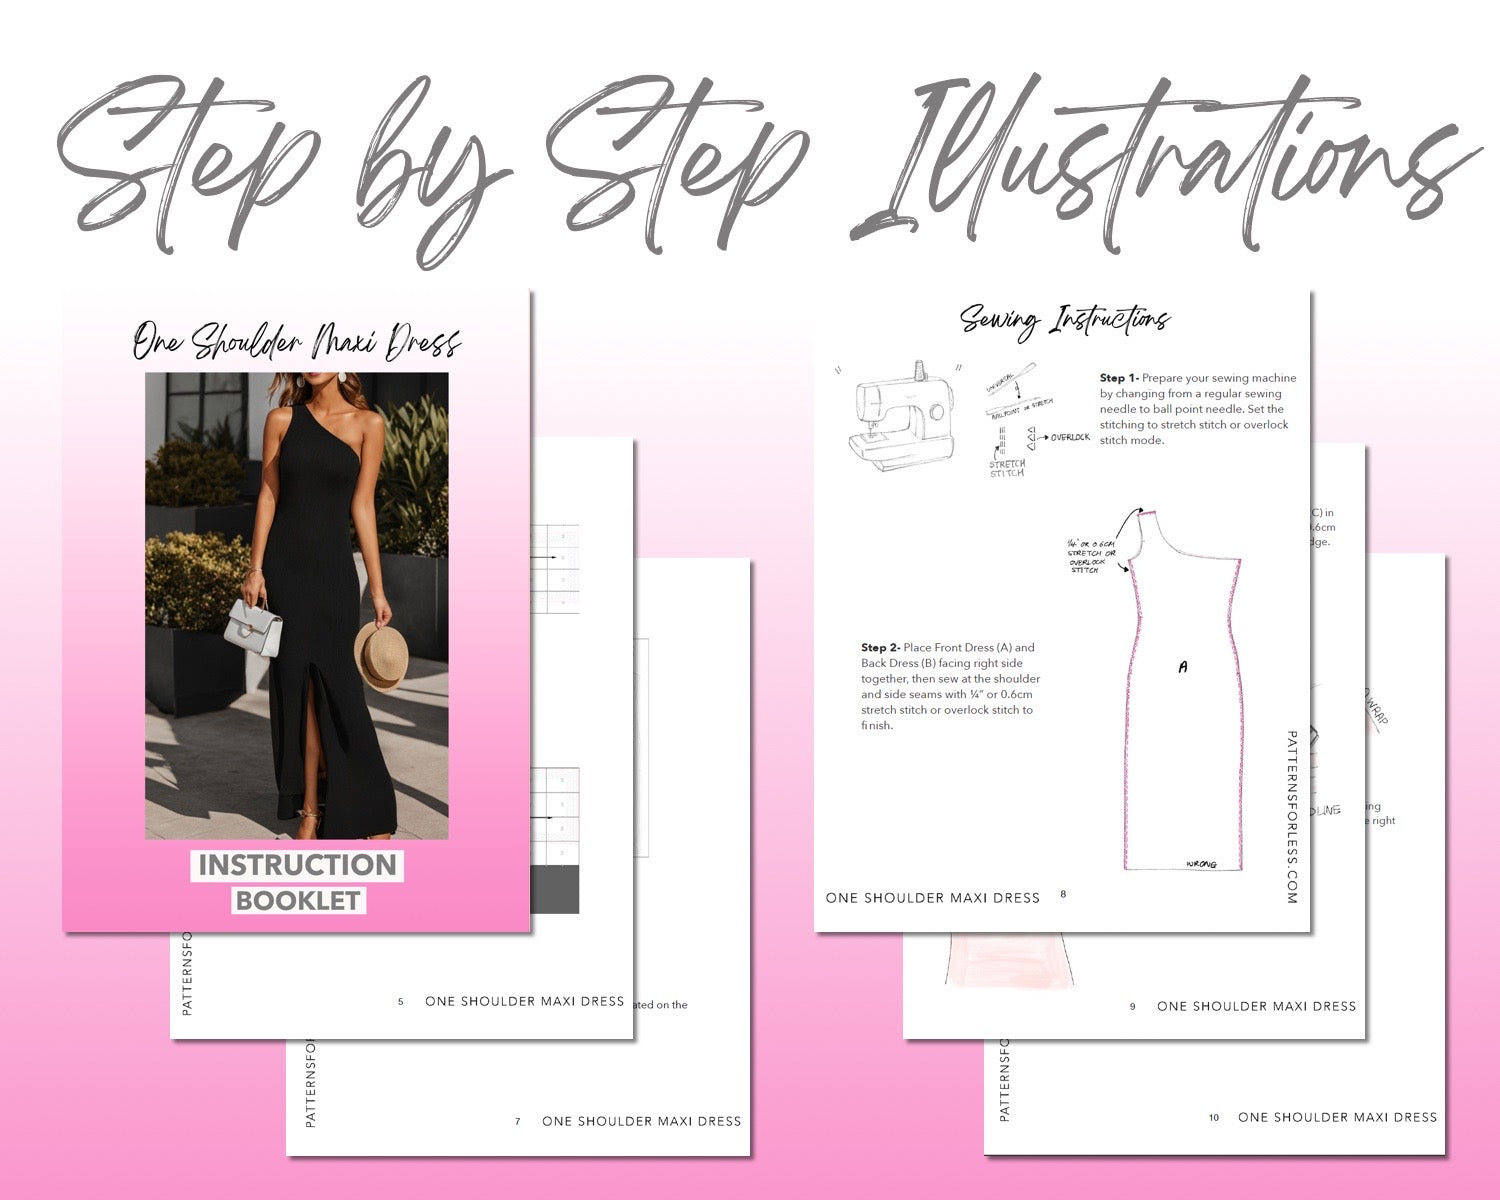 One Shoulder Maxi Dress sewing pattern step by step illustrations.